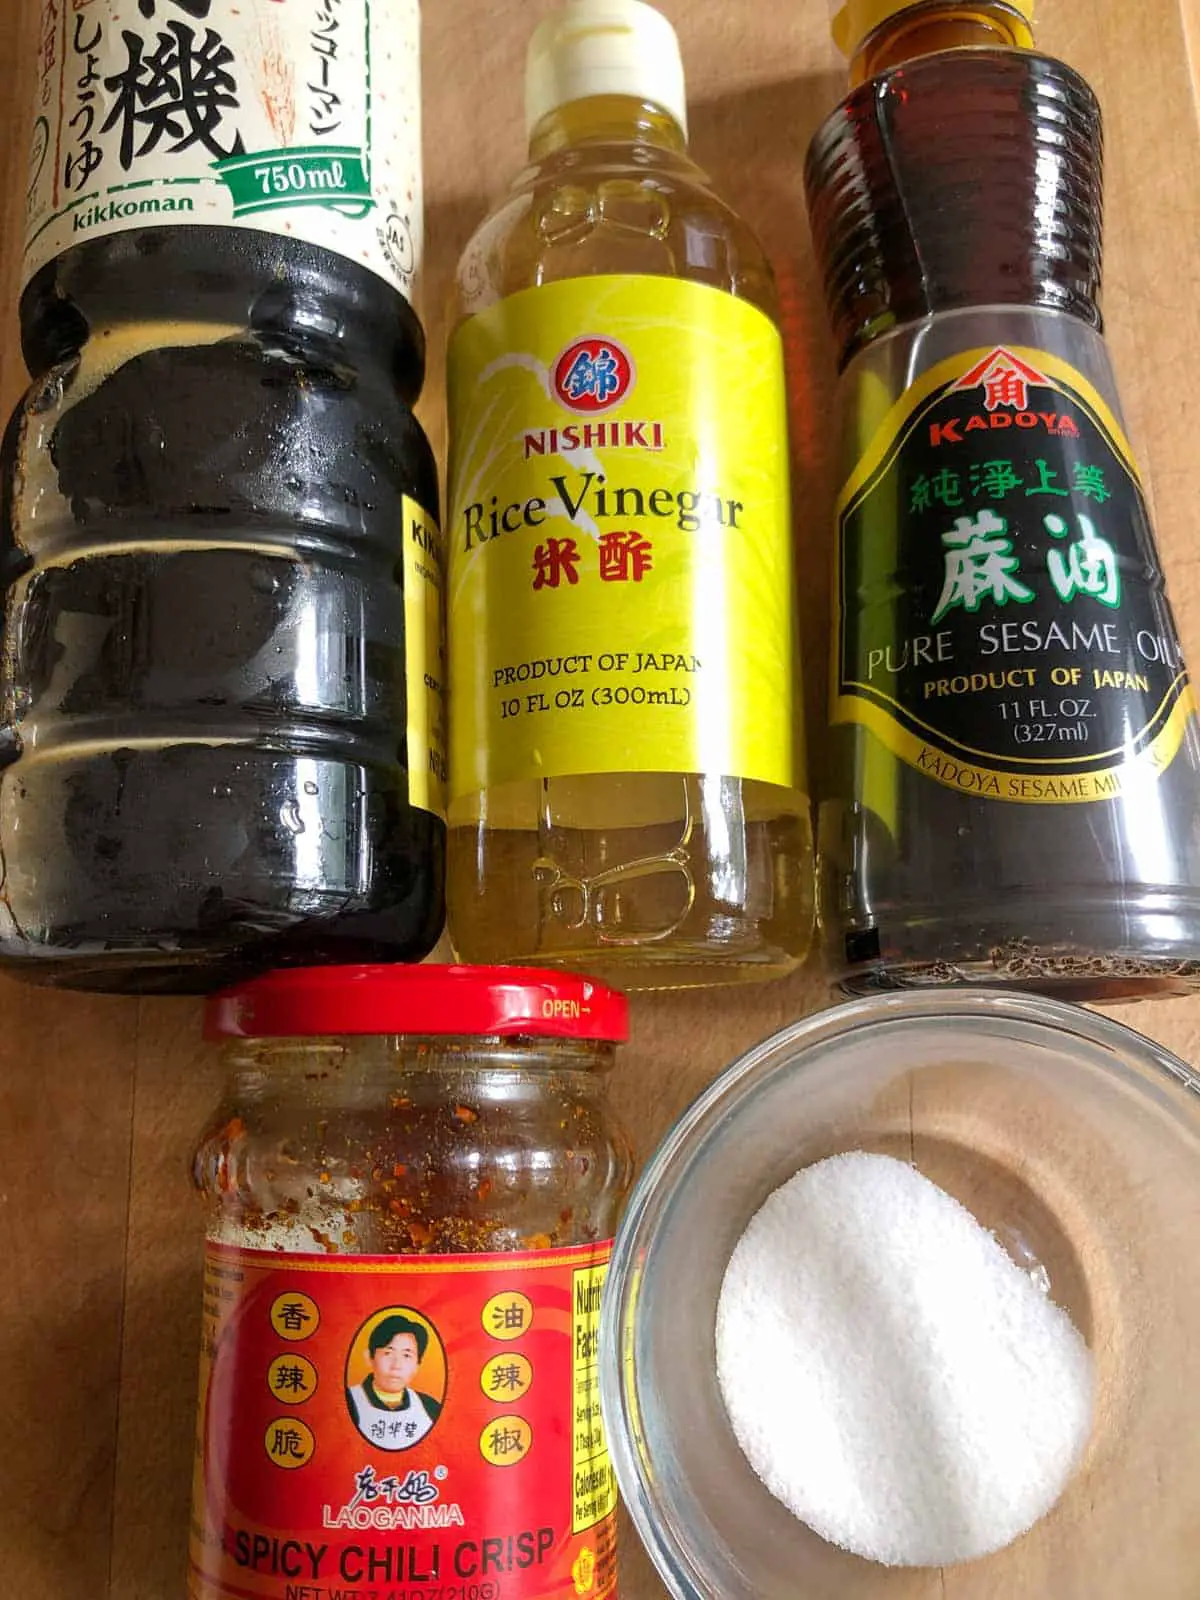 Bottles of soy sauce, rice vinegar, sesame oil, spicy chili crisp, and a glass bowl with sugar